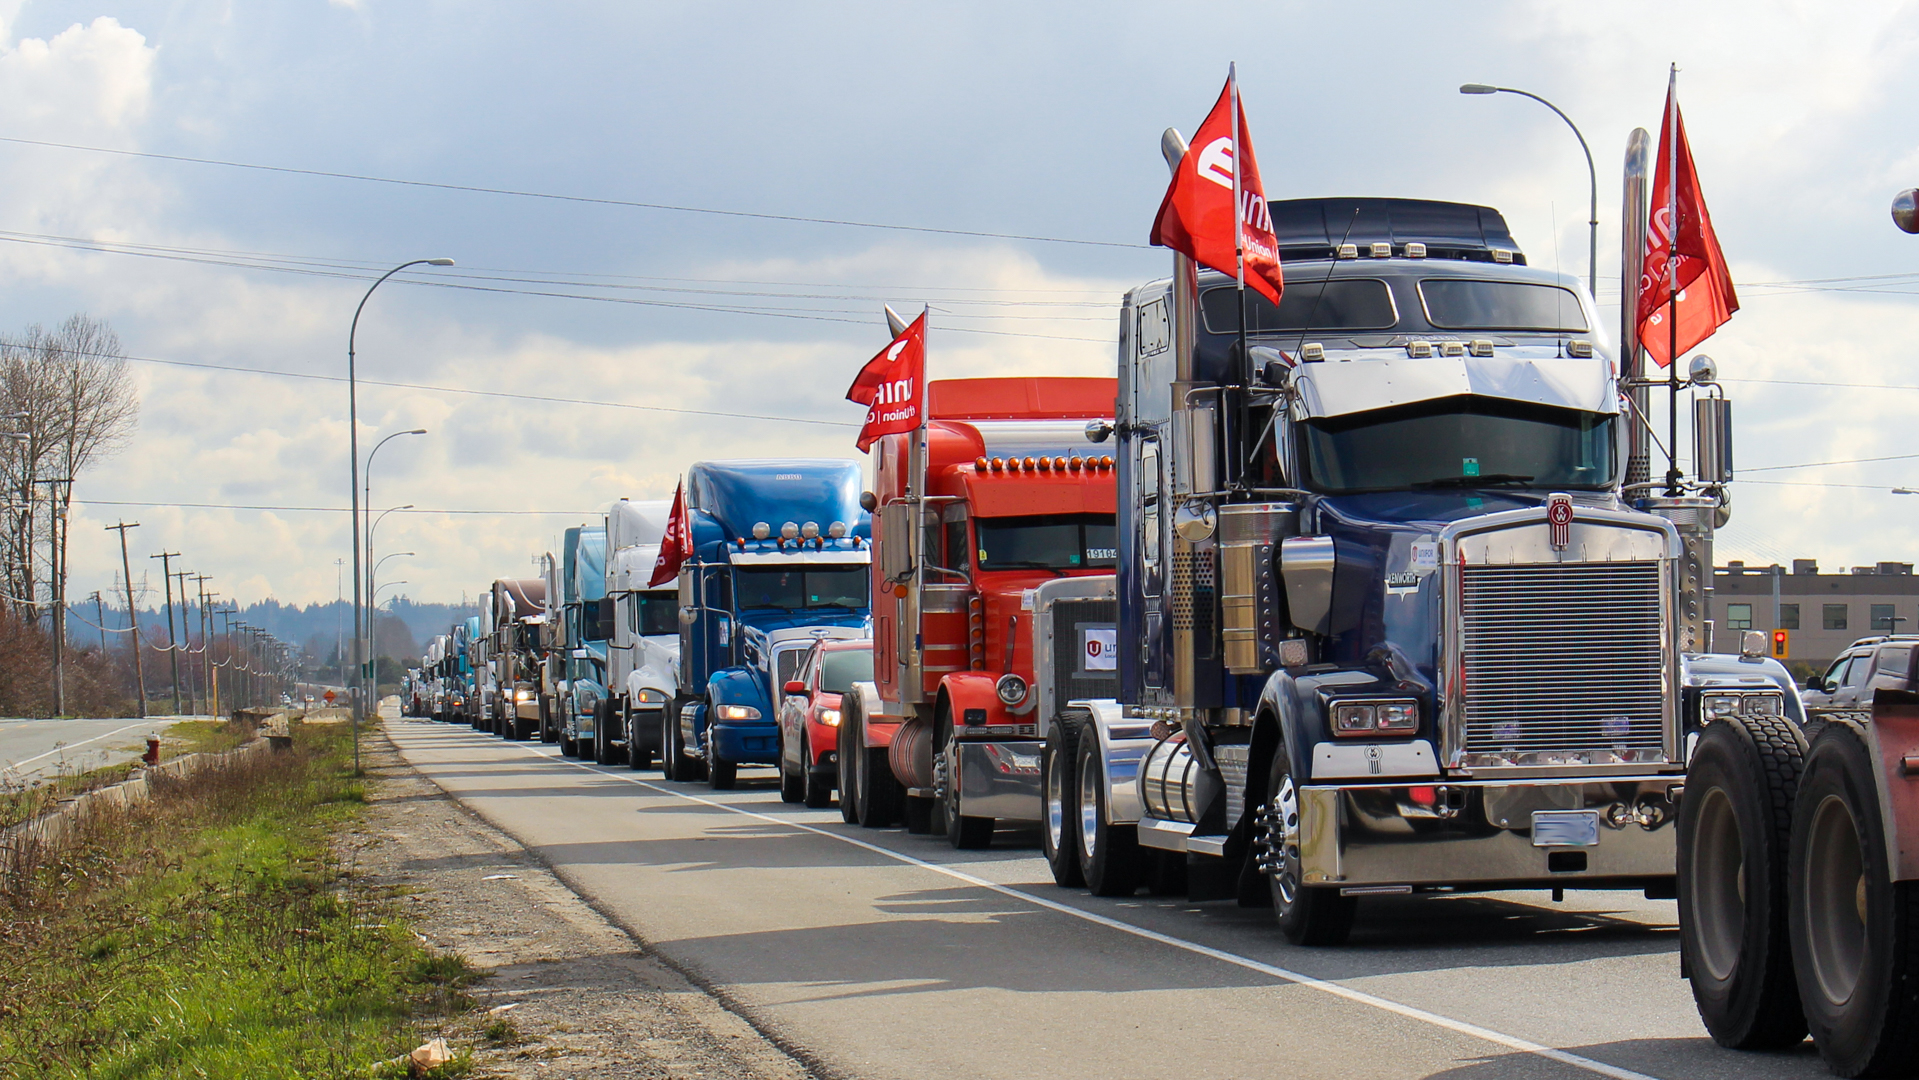 Long convoy of tractor trailer trucks, some with with Unifor flags